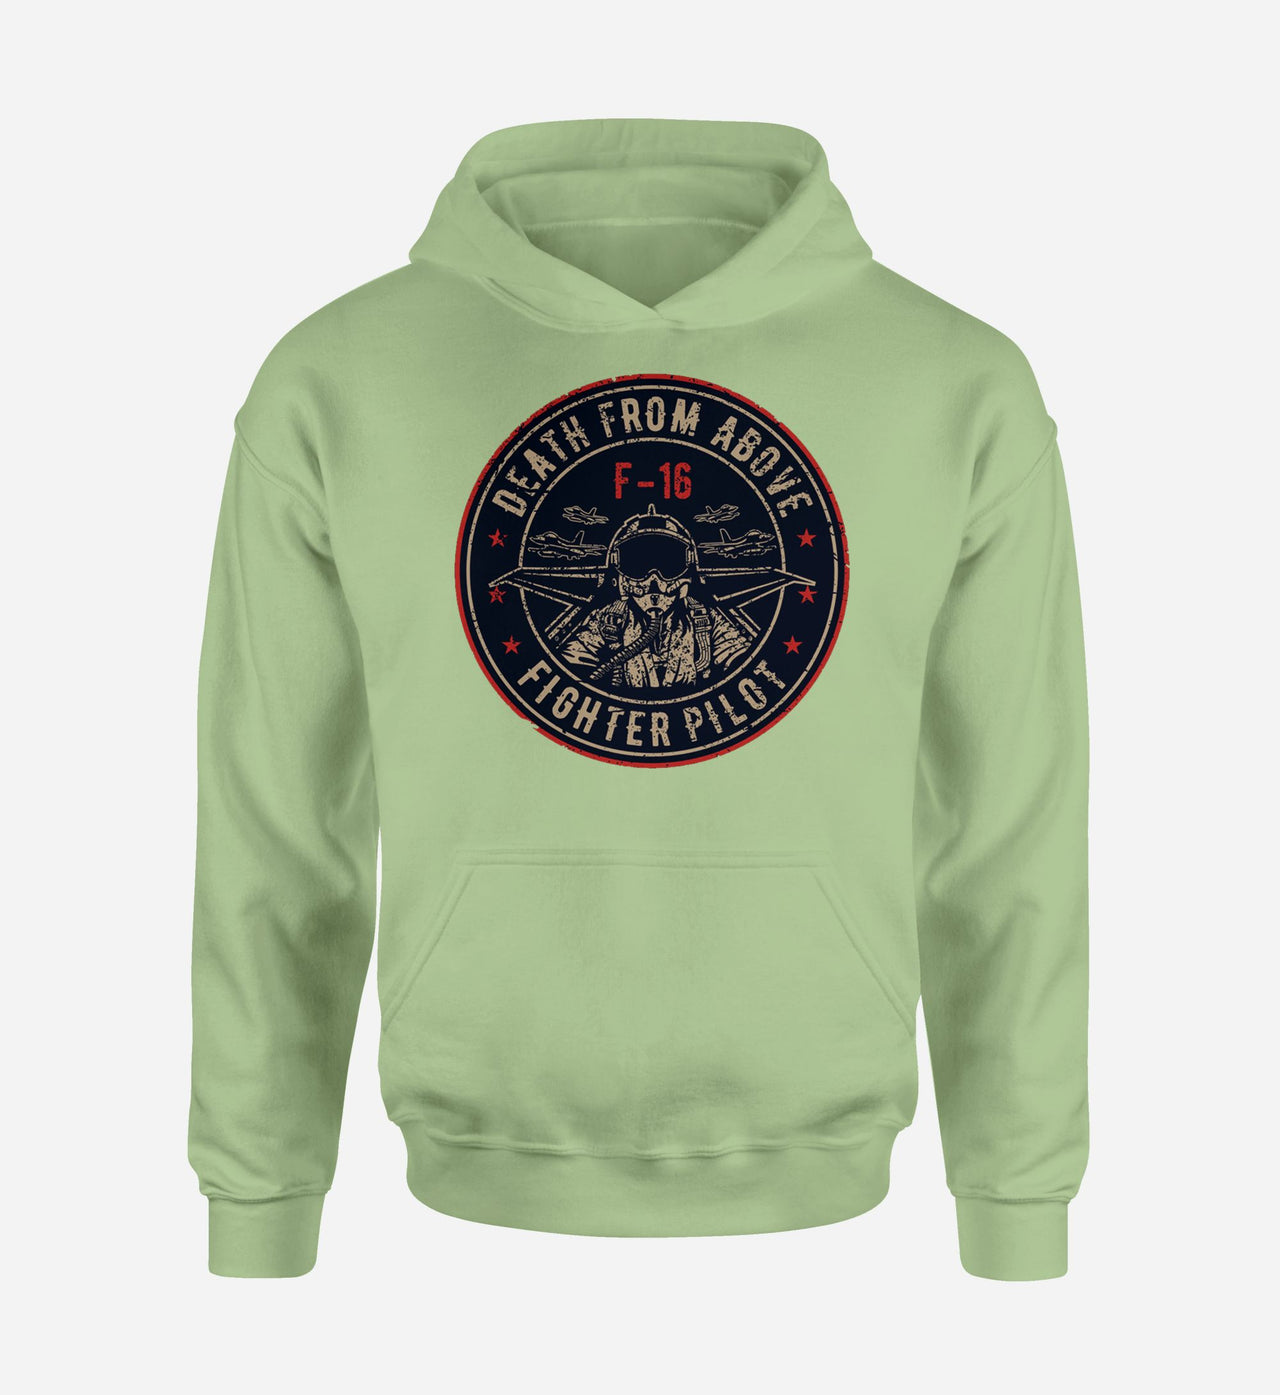 Fighting Falcon F16 - Death From Above Designed Hoodies